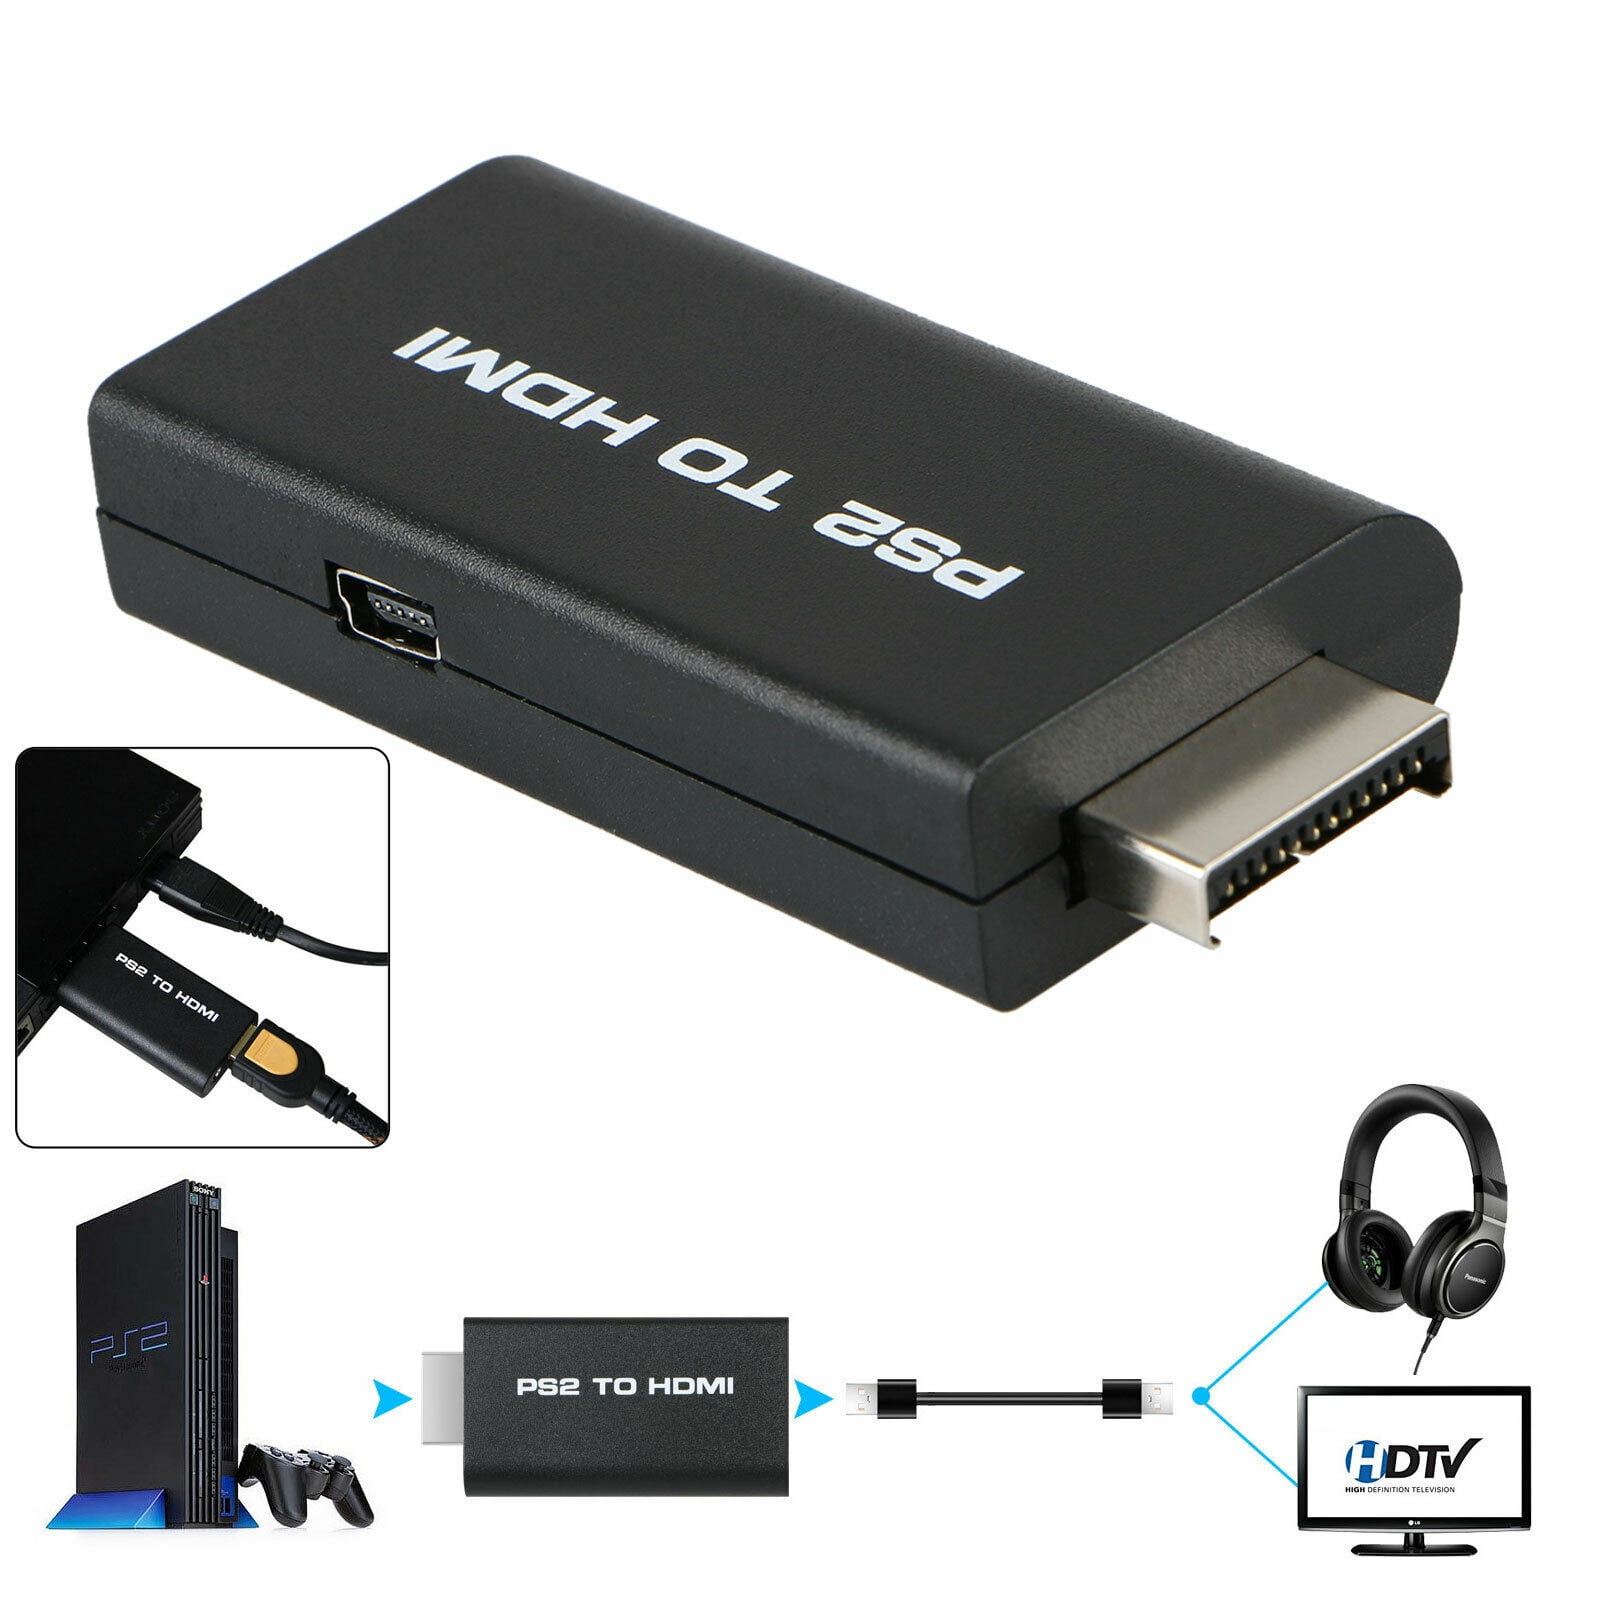 Best PS2 HDMI Converter to Consider - Explosion Of Fun